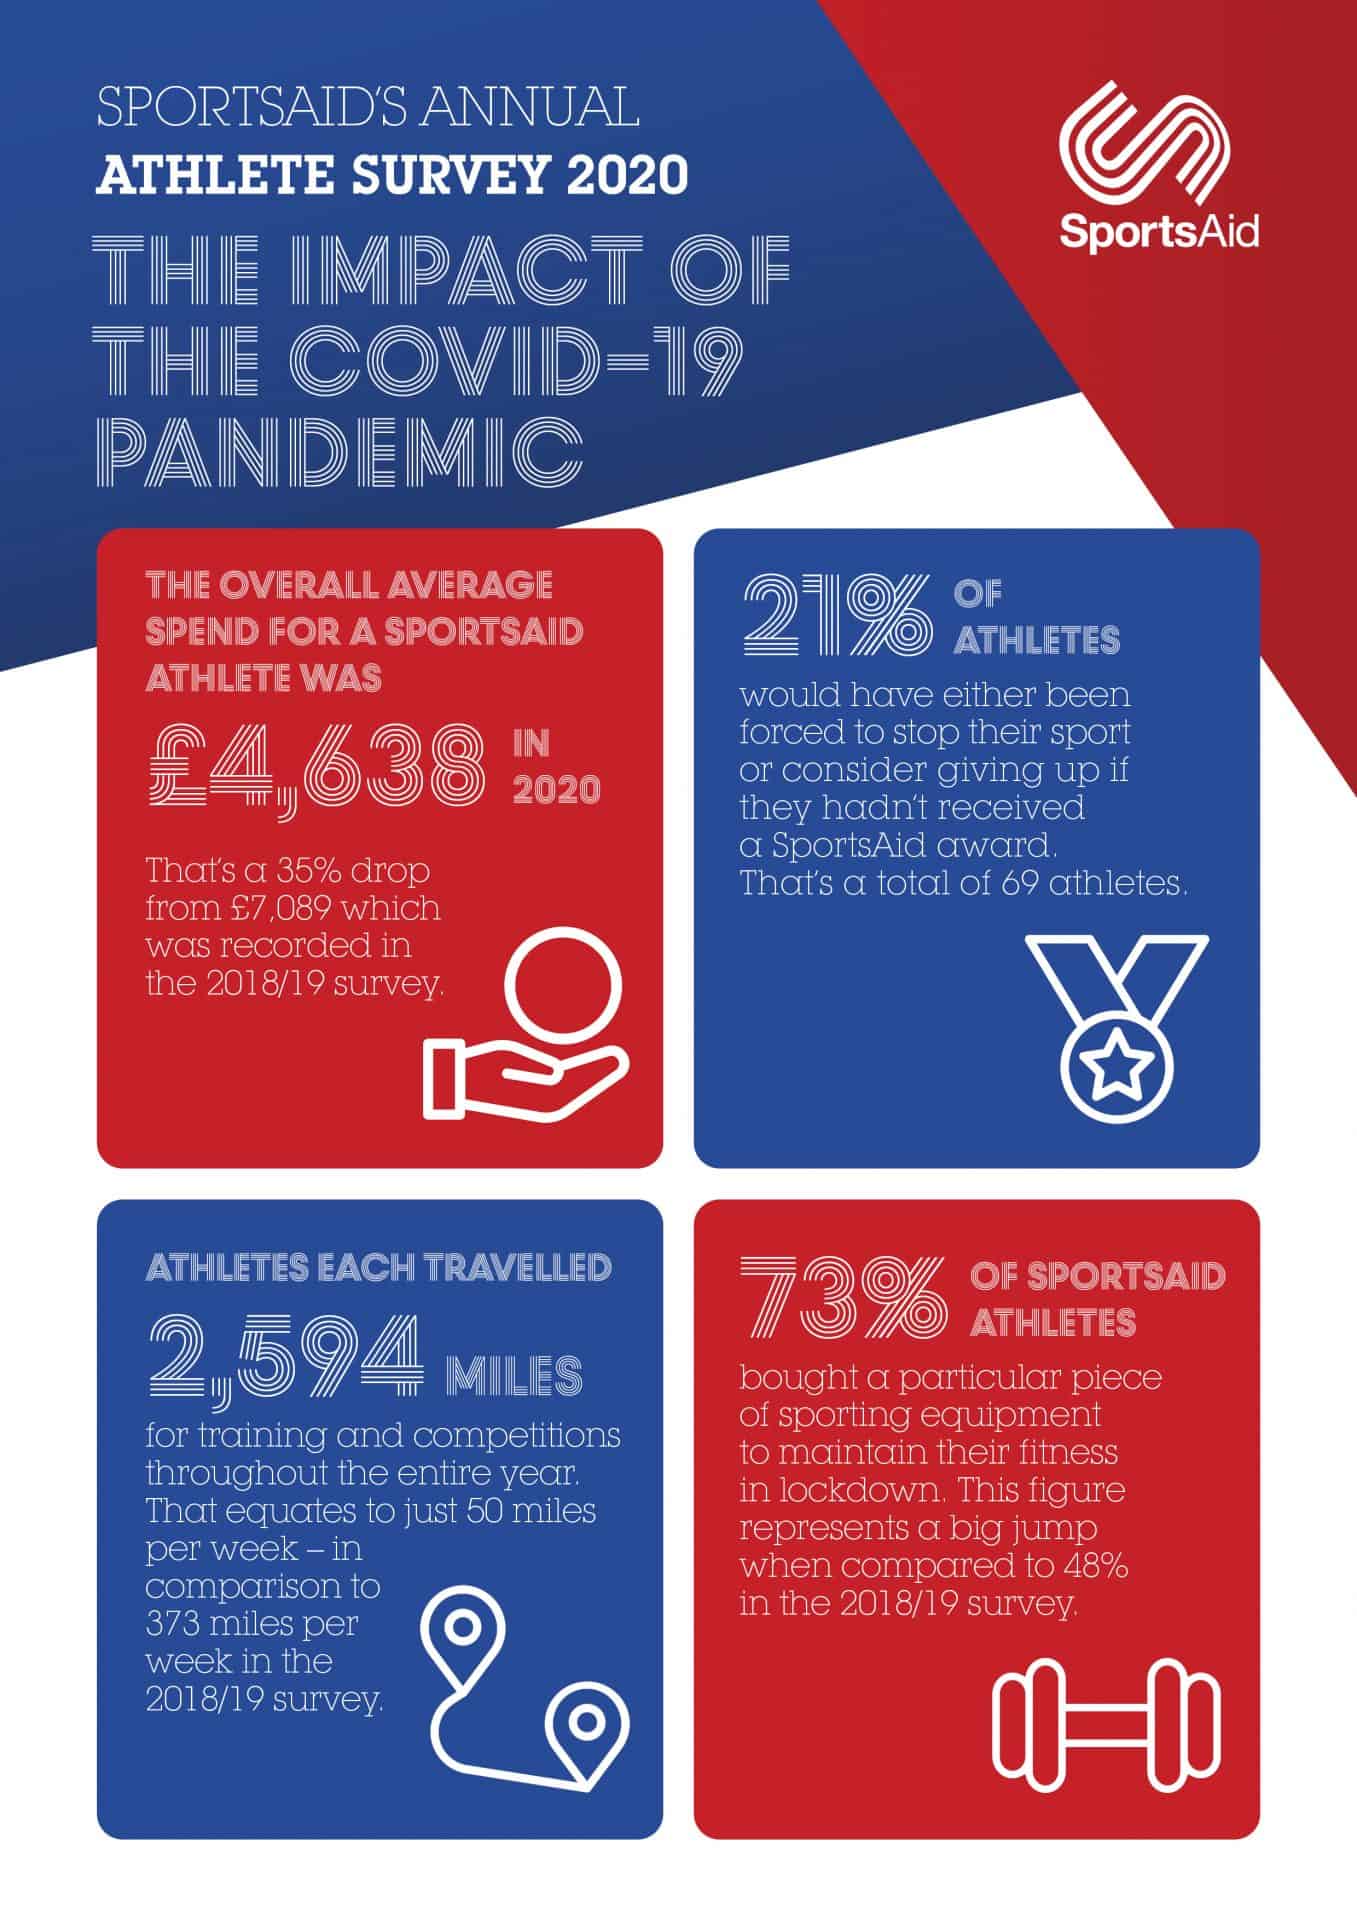 SportsAid survey reveals resilience of next generation of athletes